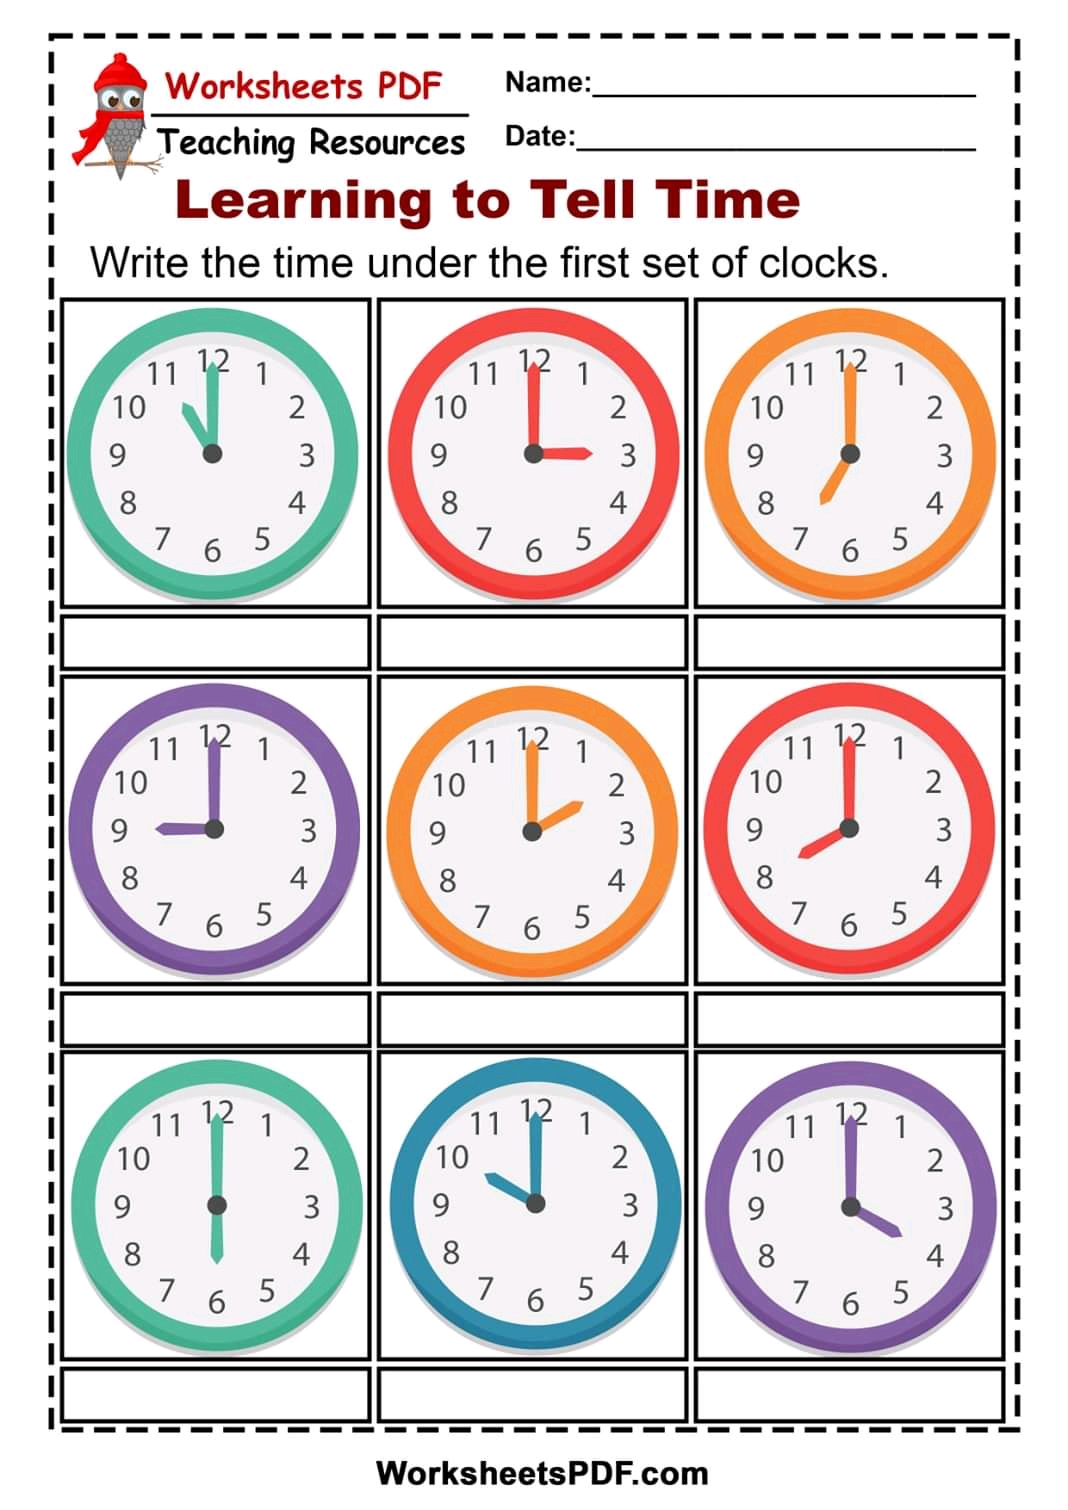 Free Printable Worksheets For Teaching Time